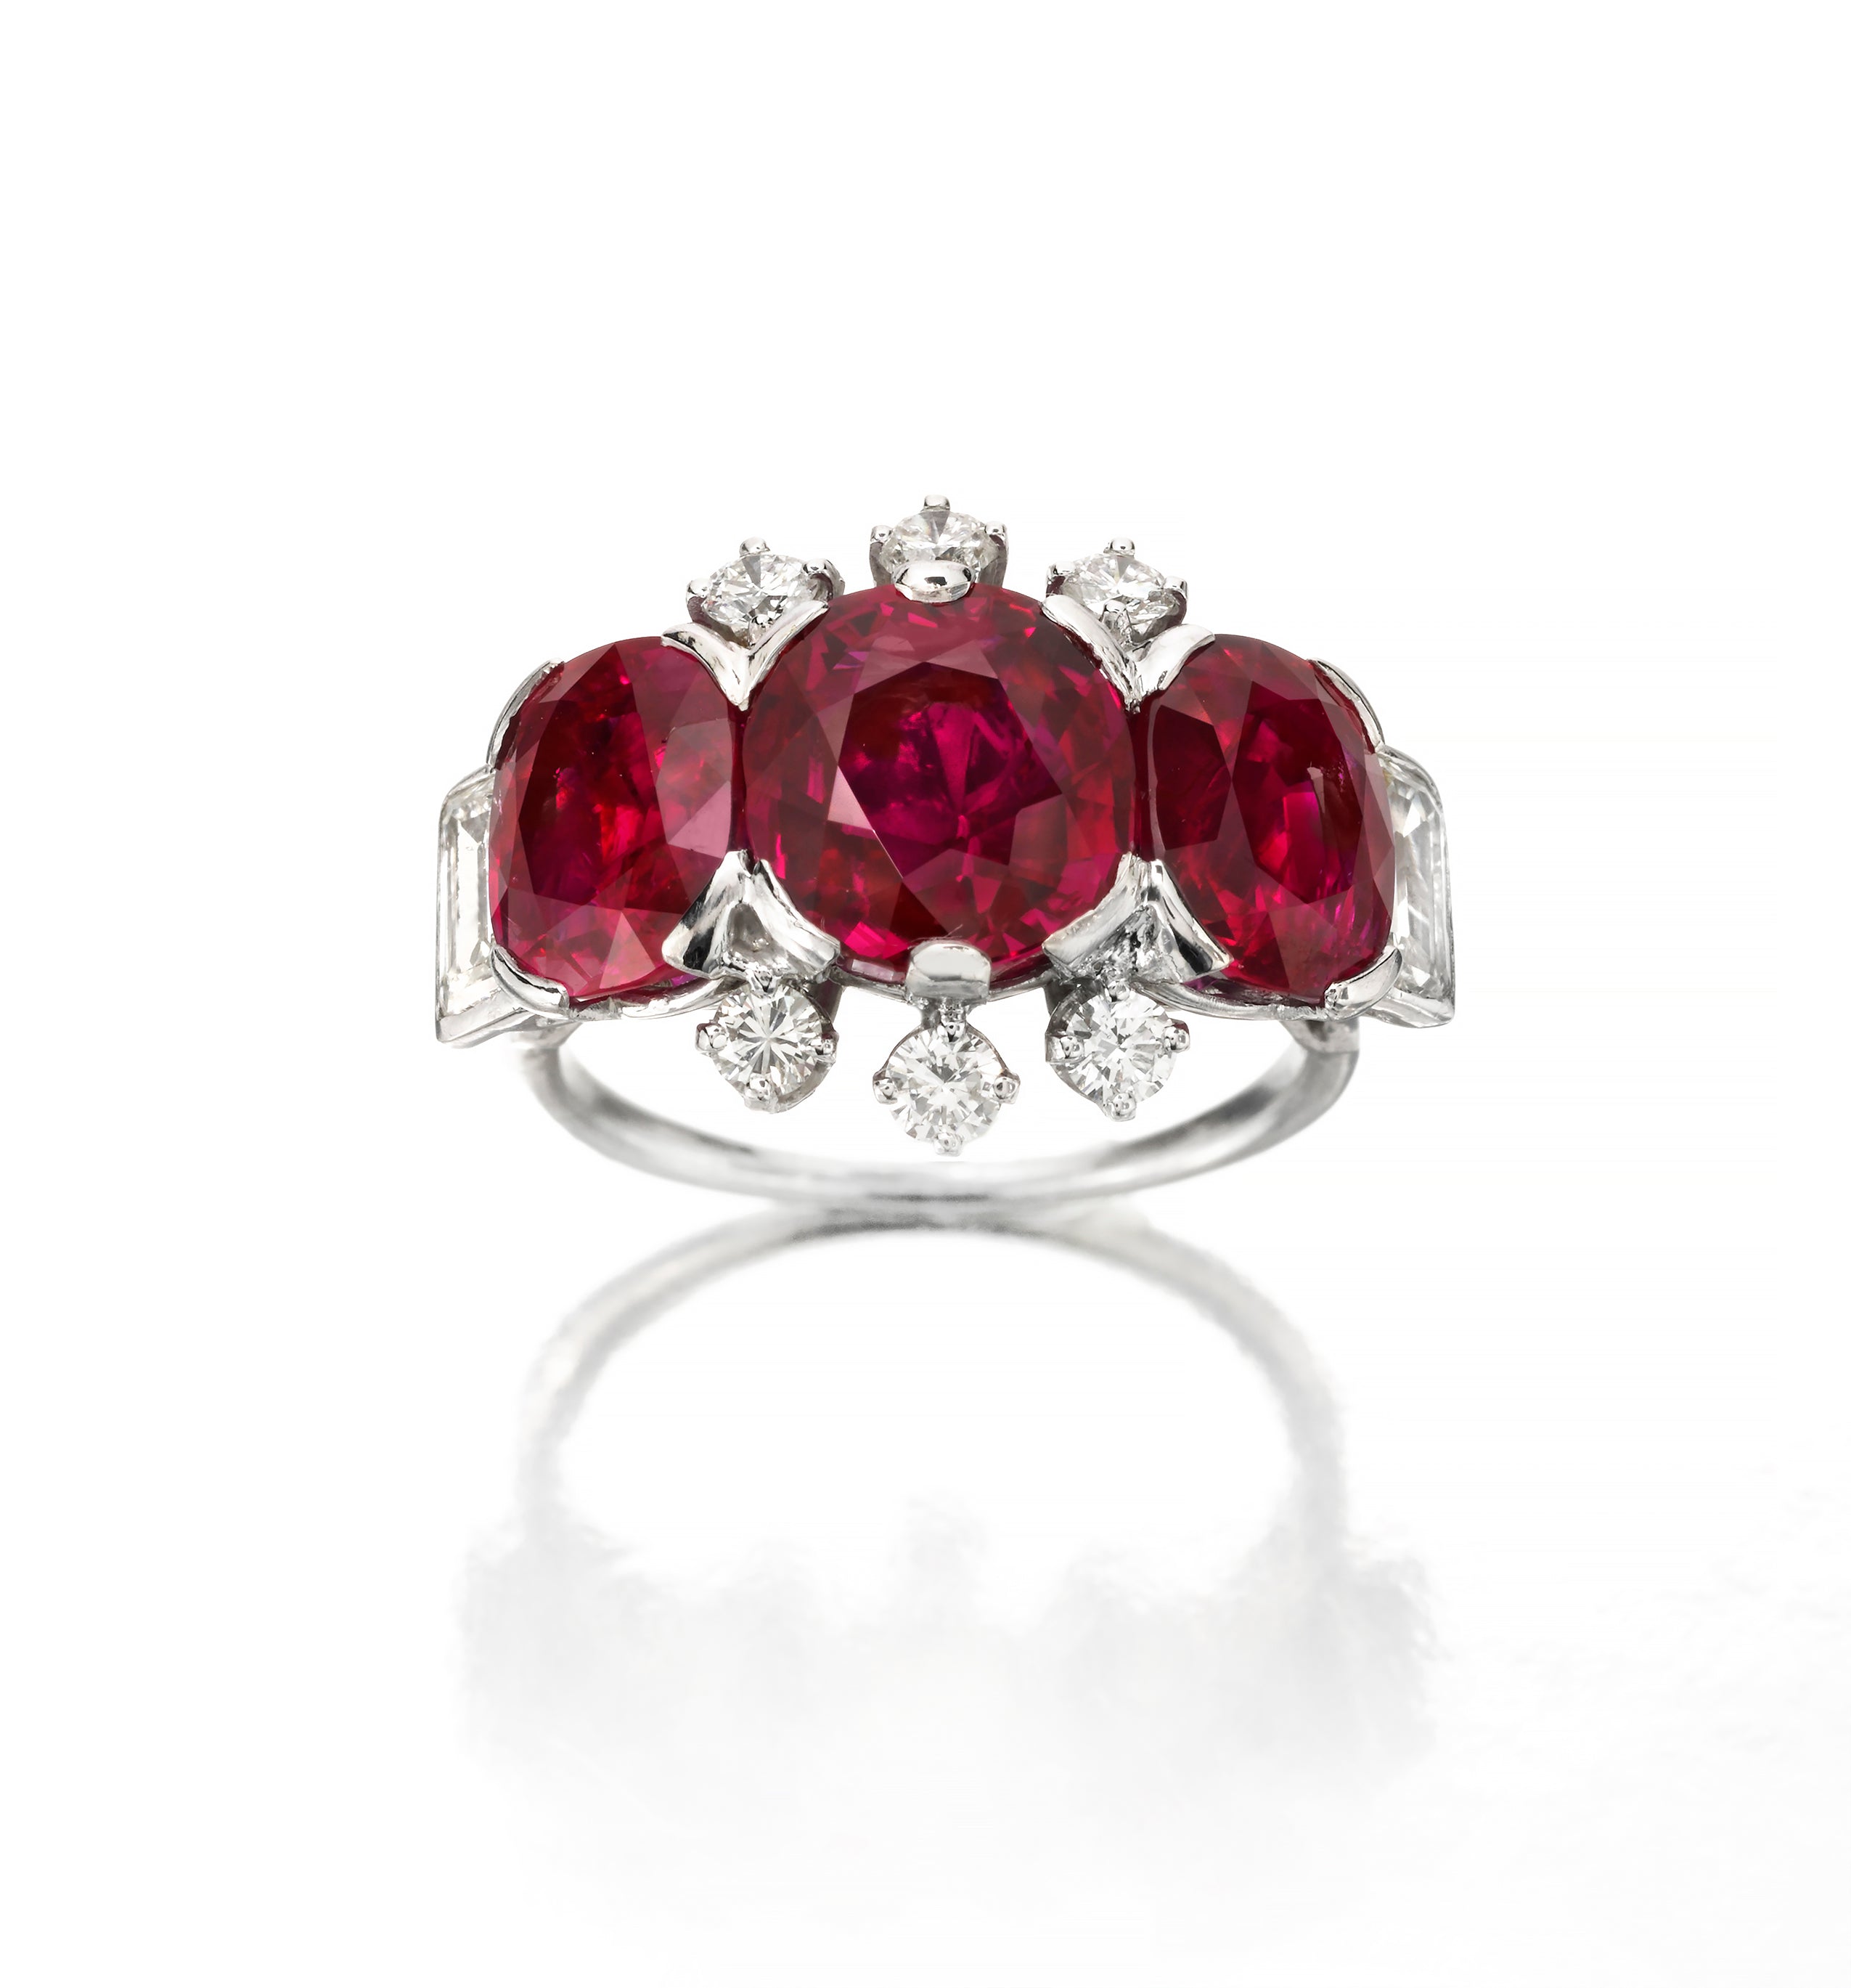 THE PRINCESS MARGARET RUBY RING: A RUBY AND DIAMOND RING